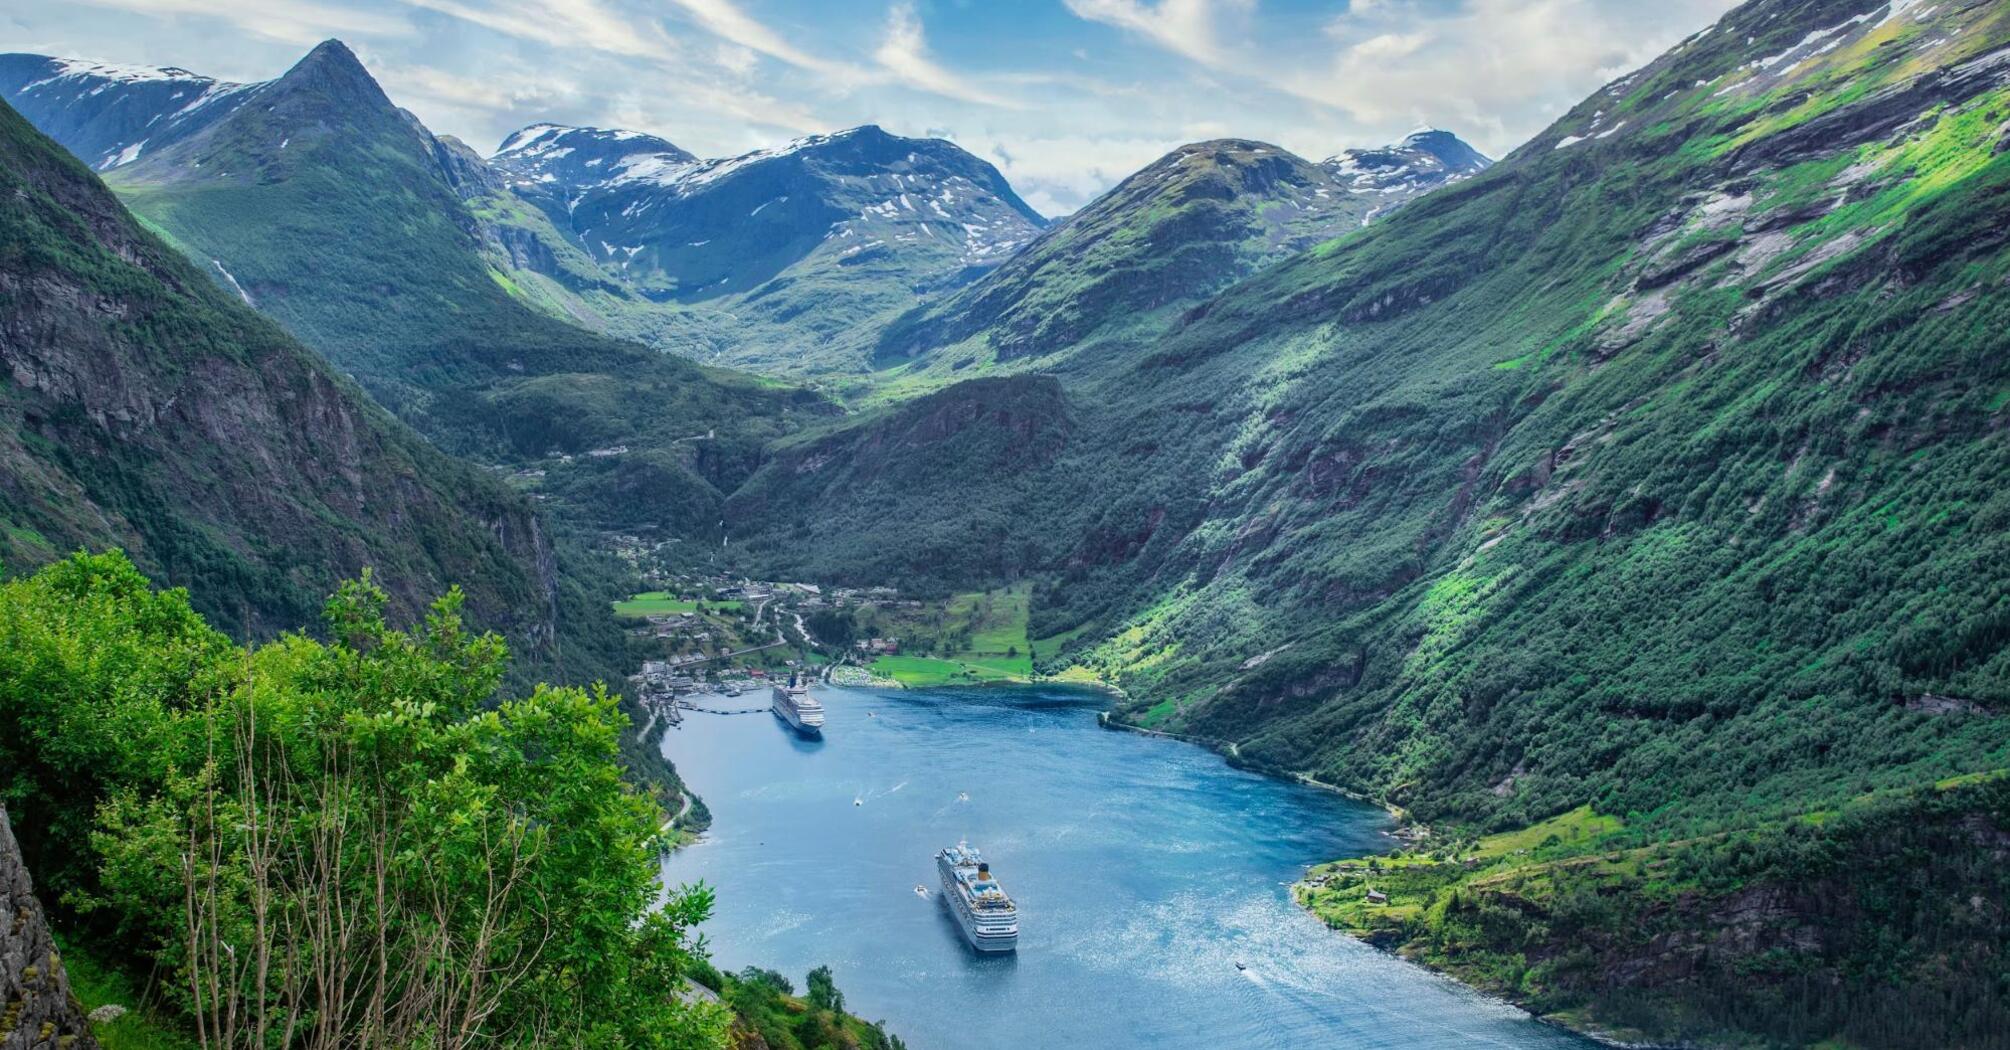 A fjord with cruise ships surrounded by tall green mountains